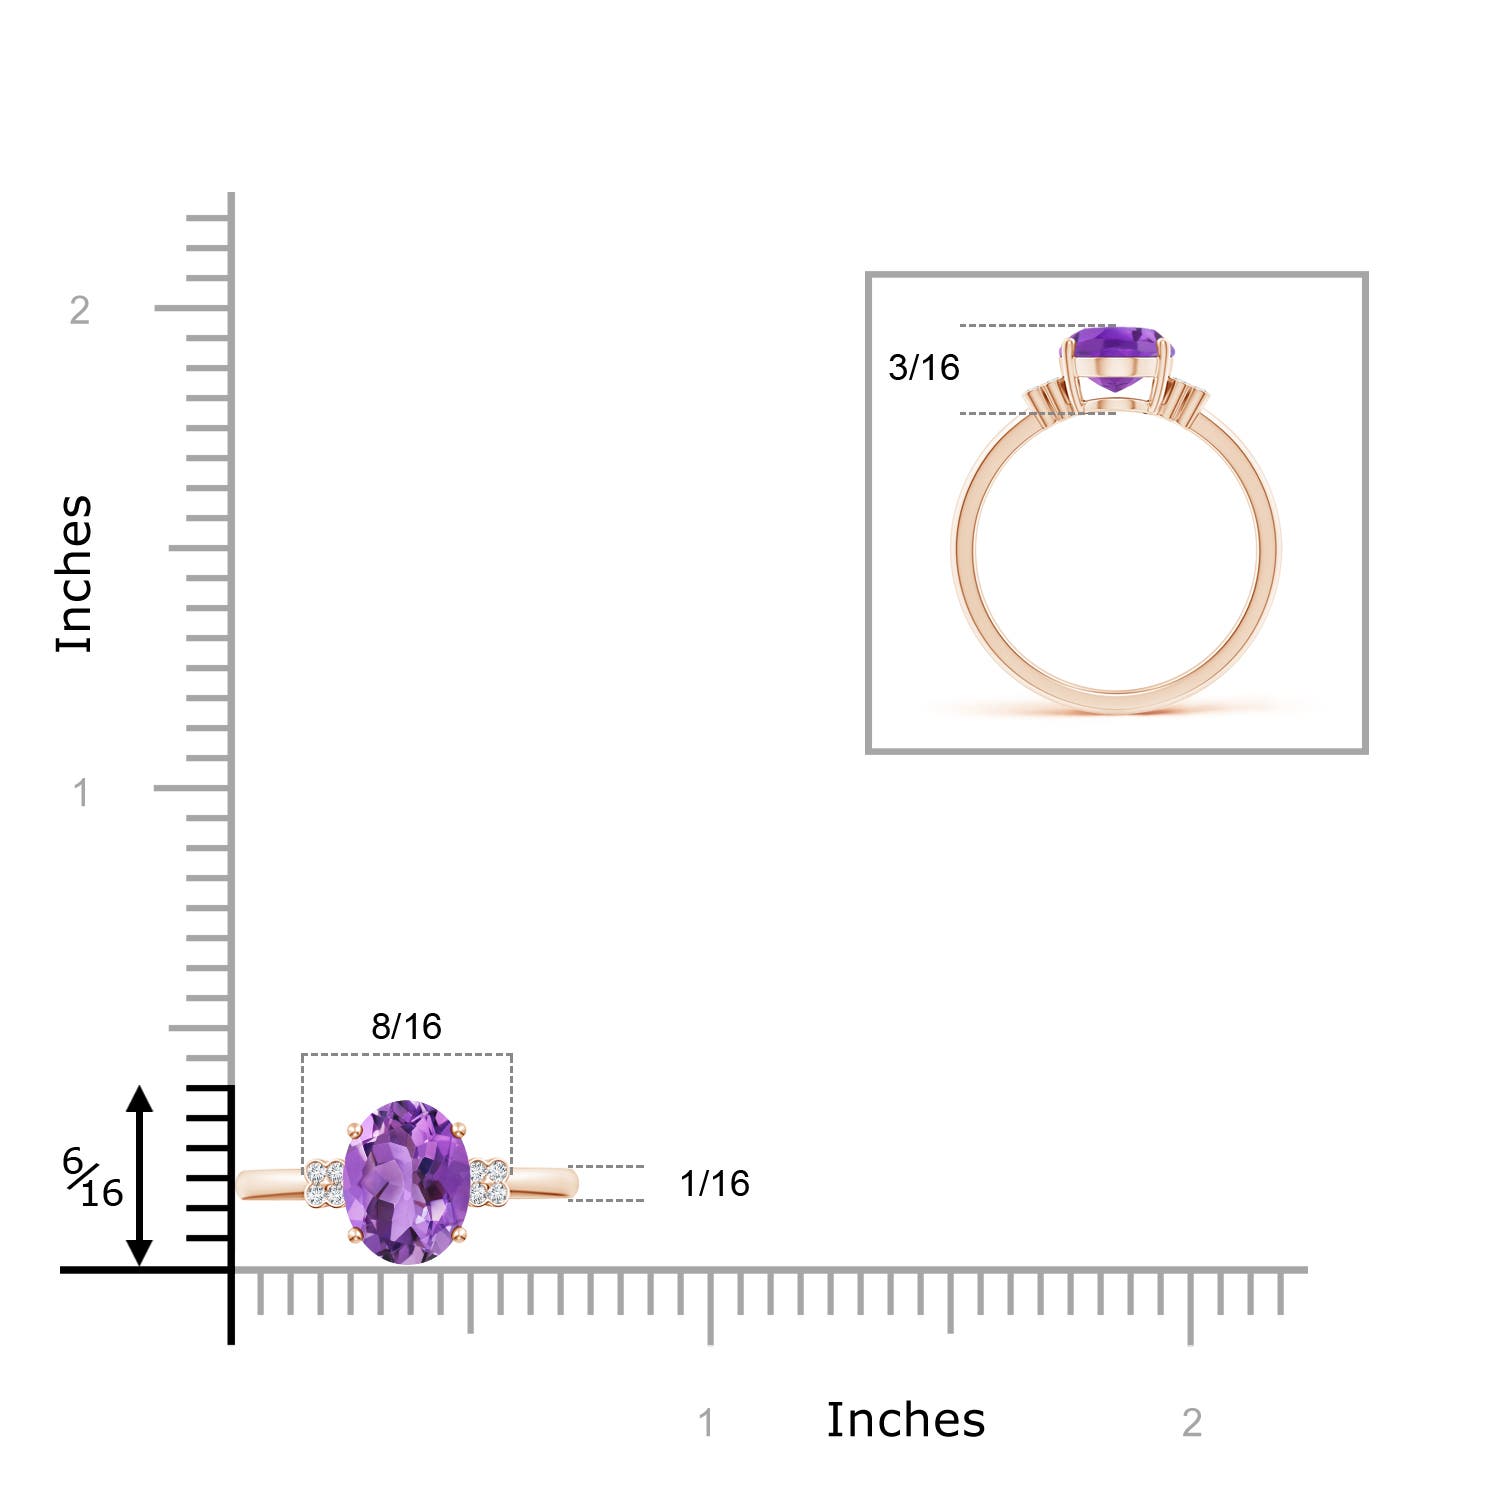 AA - Amethyst / 1.66 CT / 14 KT Rose Gold